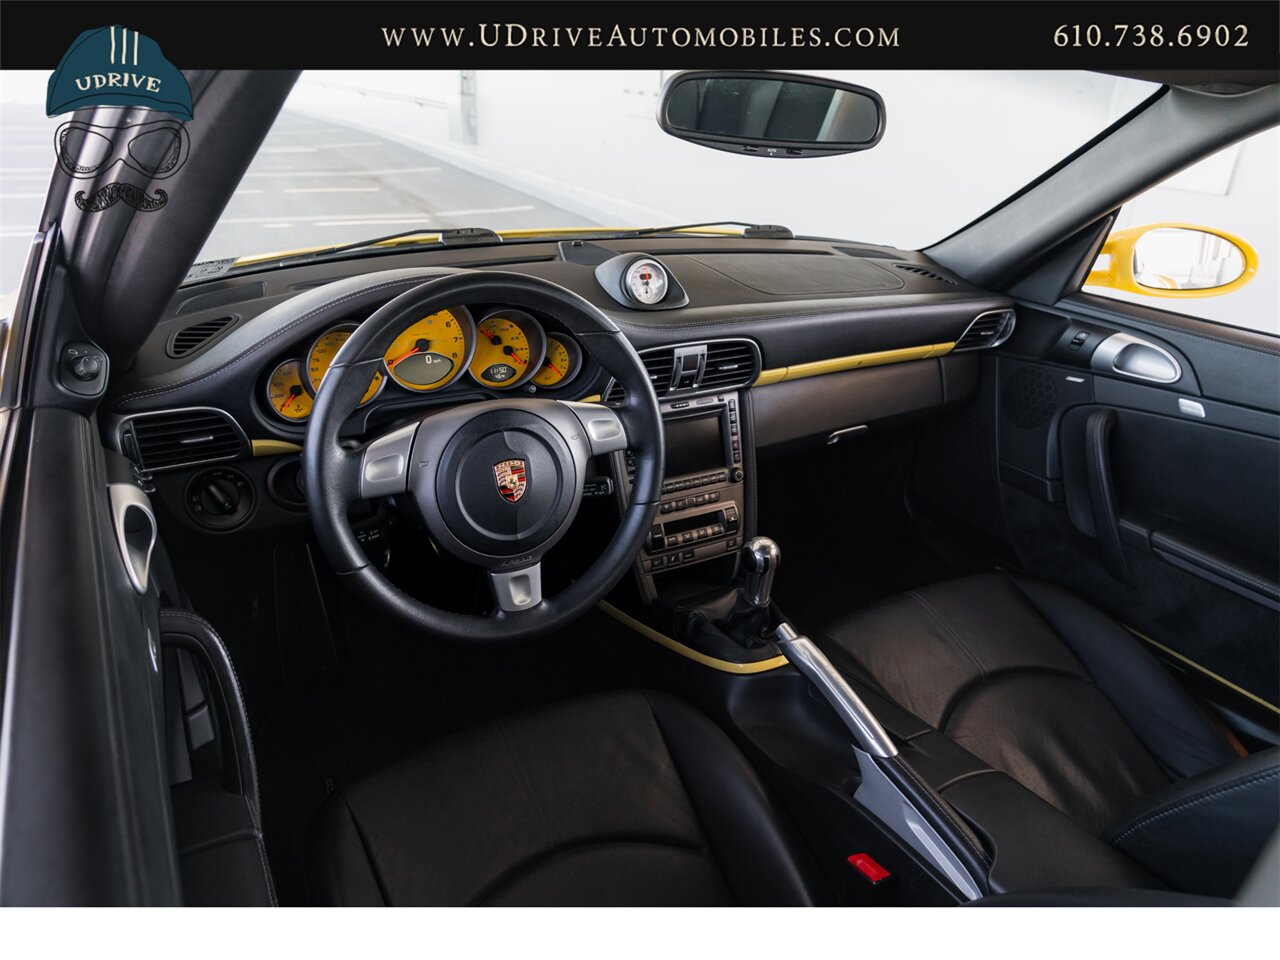 2007 Porsche 911 Carrera 4S 997 C4S Paint To Sample Pastel Yellow  6 Speed Sport Chrono Full Leather Yellow Gauges - Photo 6 - West Chester, PA 19382